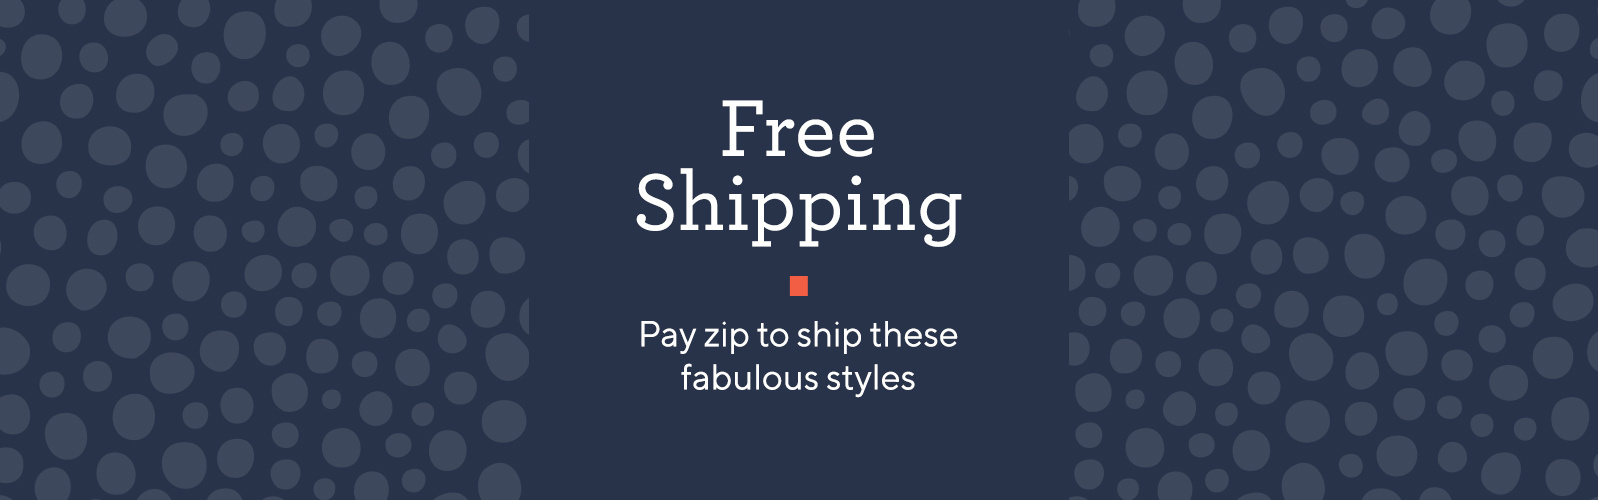 Free Shipping  Pay zip to ship these fabulous styles